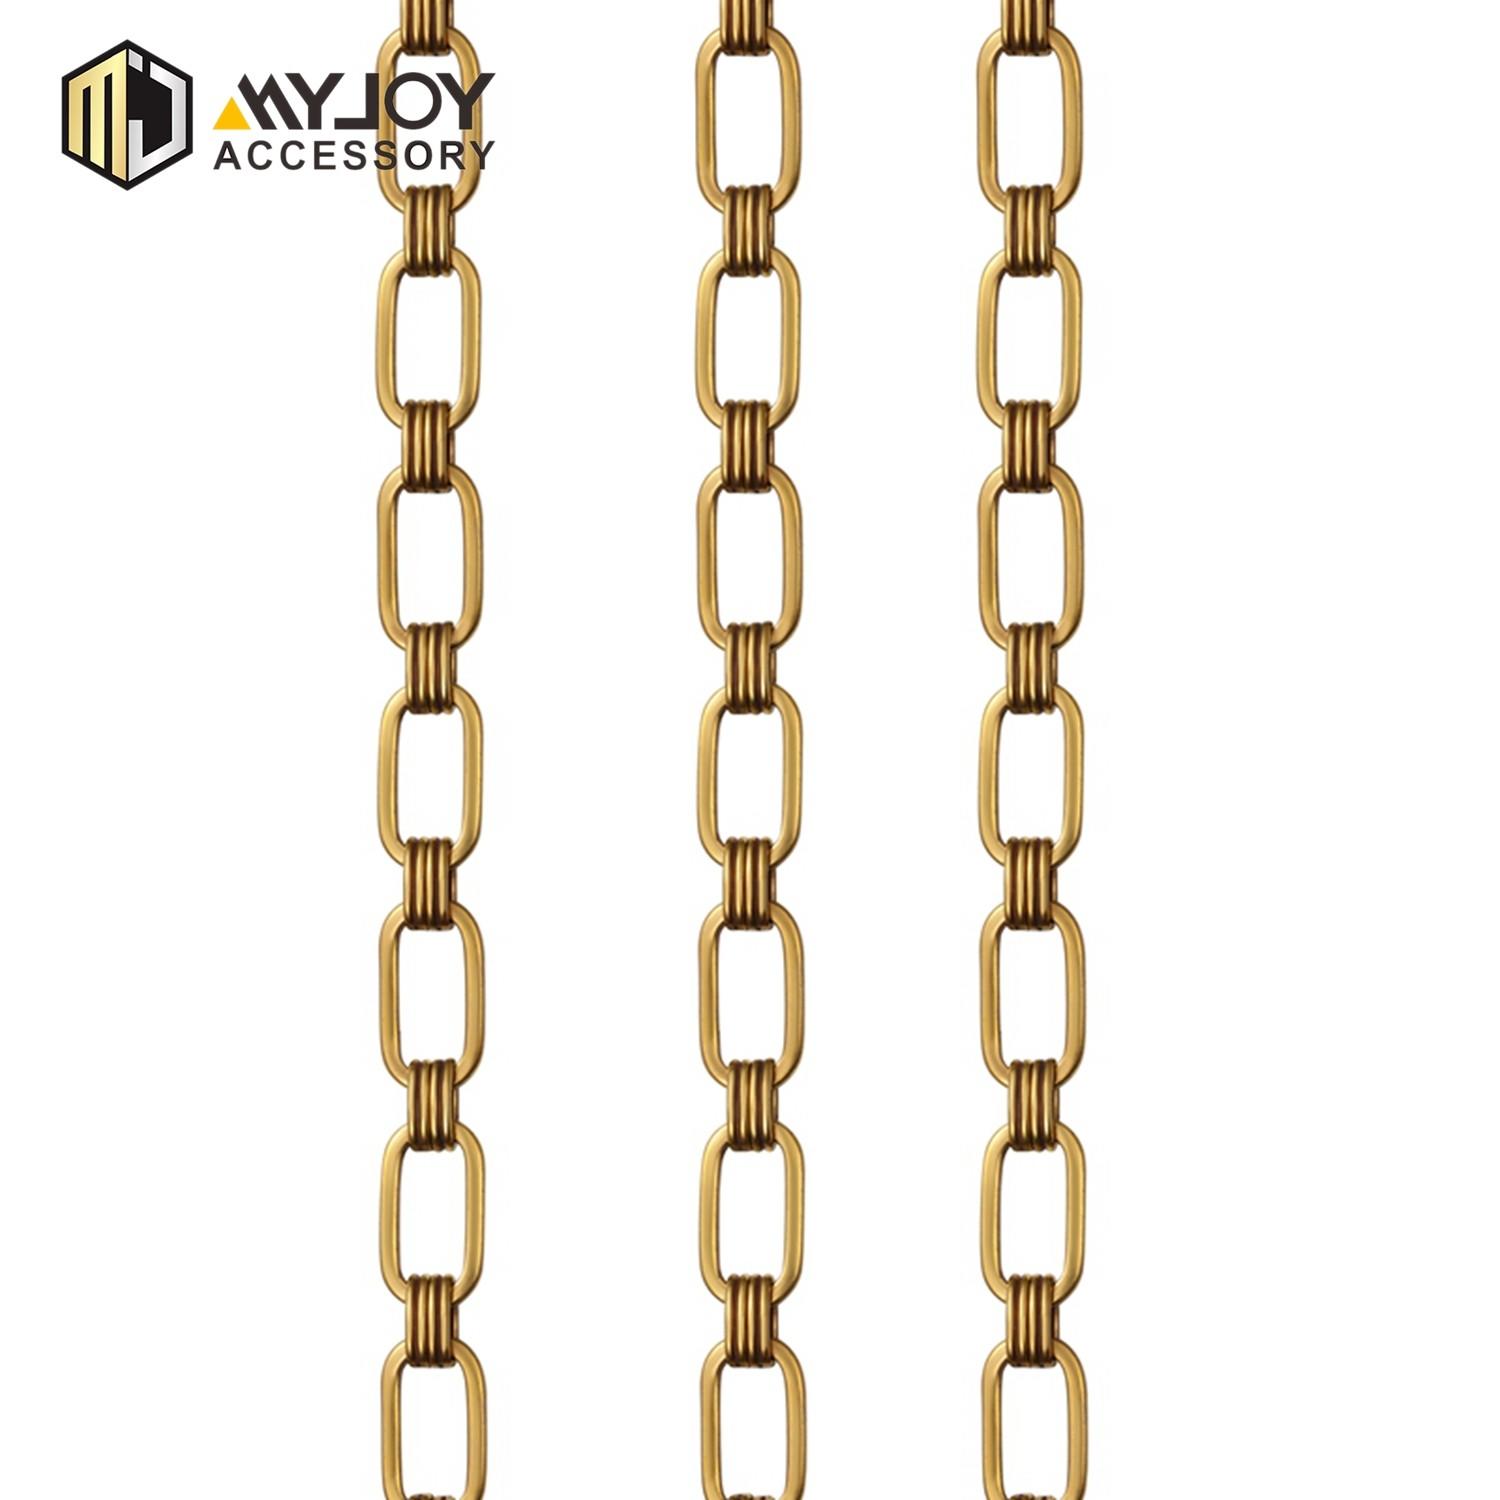 MYJOY High-quality chain strap supply for bags